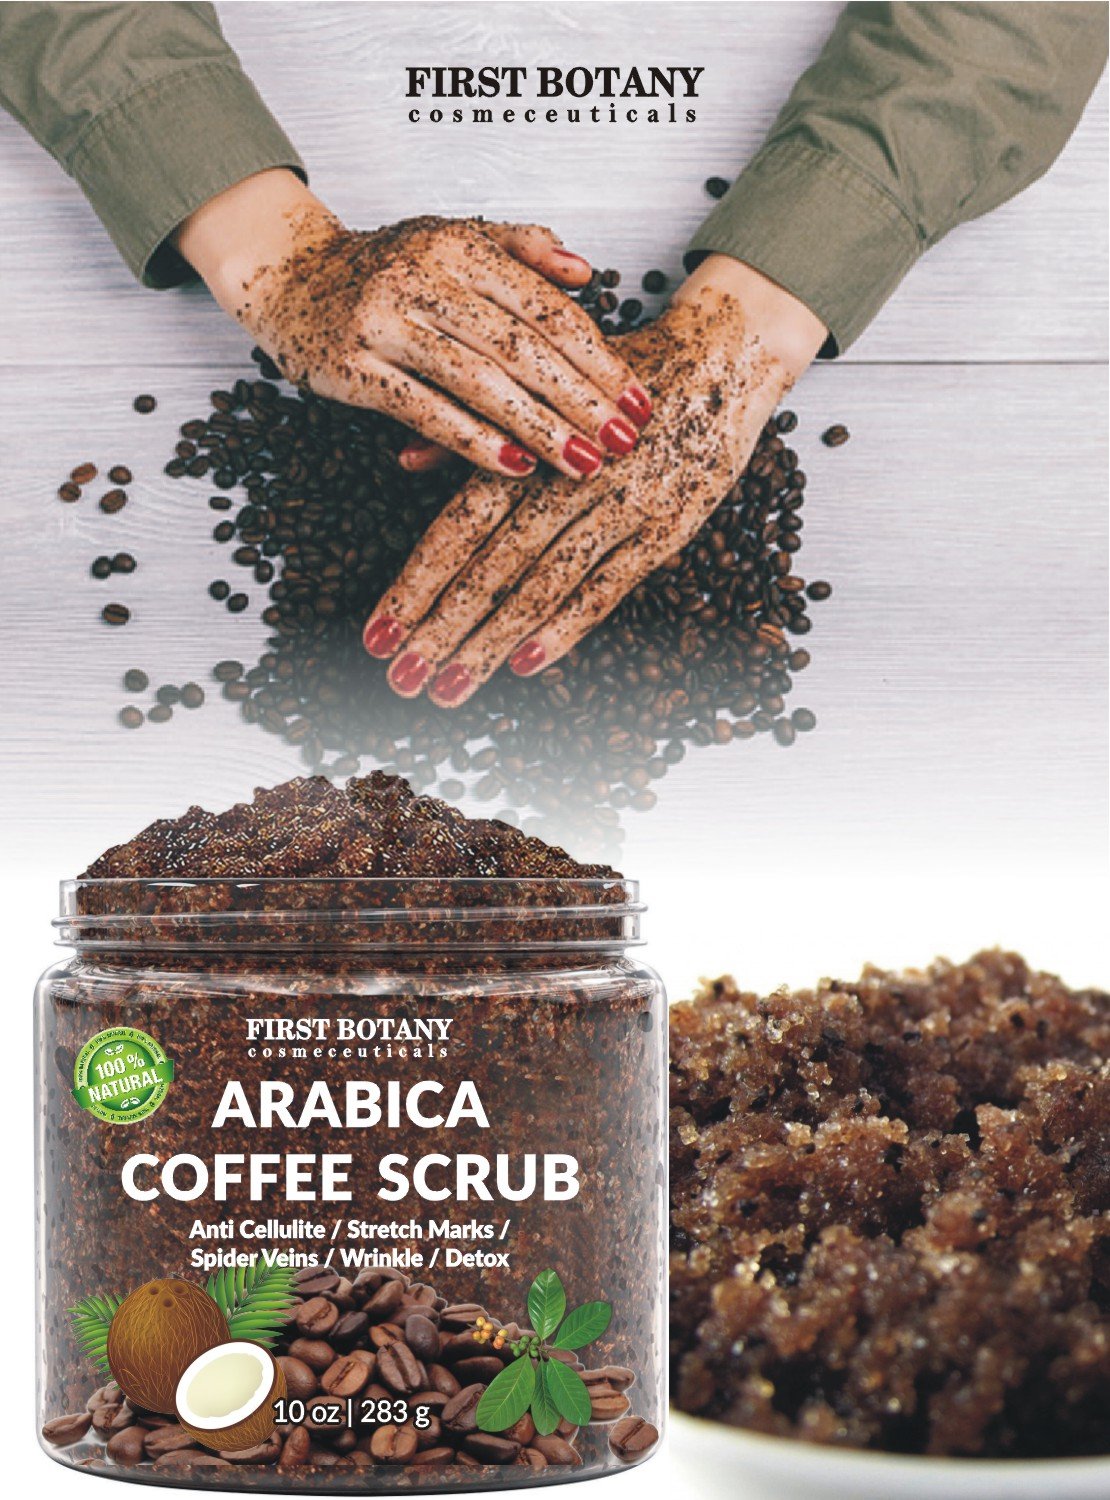 100% Natural Arabica Coffee Scrub with Organic Coffee, Coconut and Shea Butter - Best Acne, Anti Cellulite and Stretch Mark treatment, Spider Vein Therapy for Varicose Veins & Eczema (10 oz)